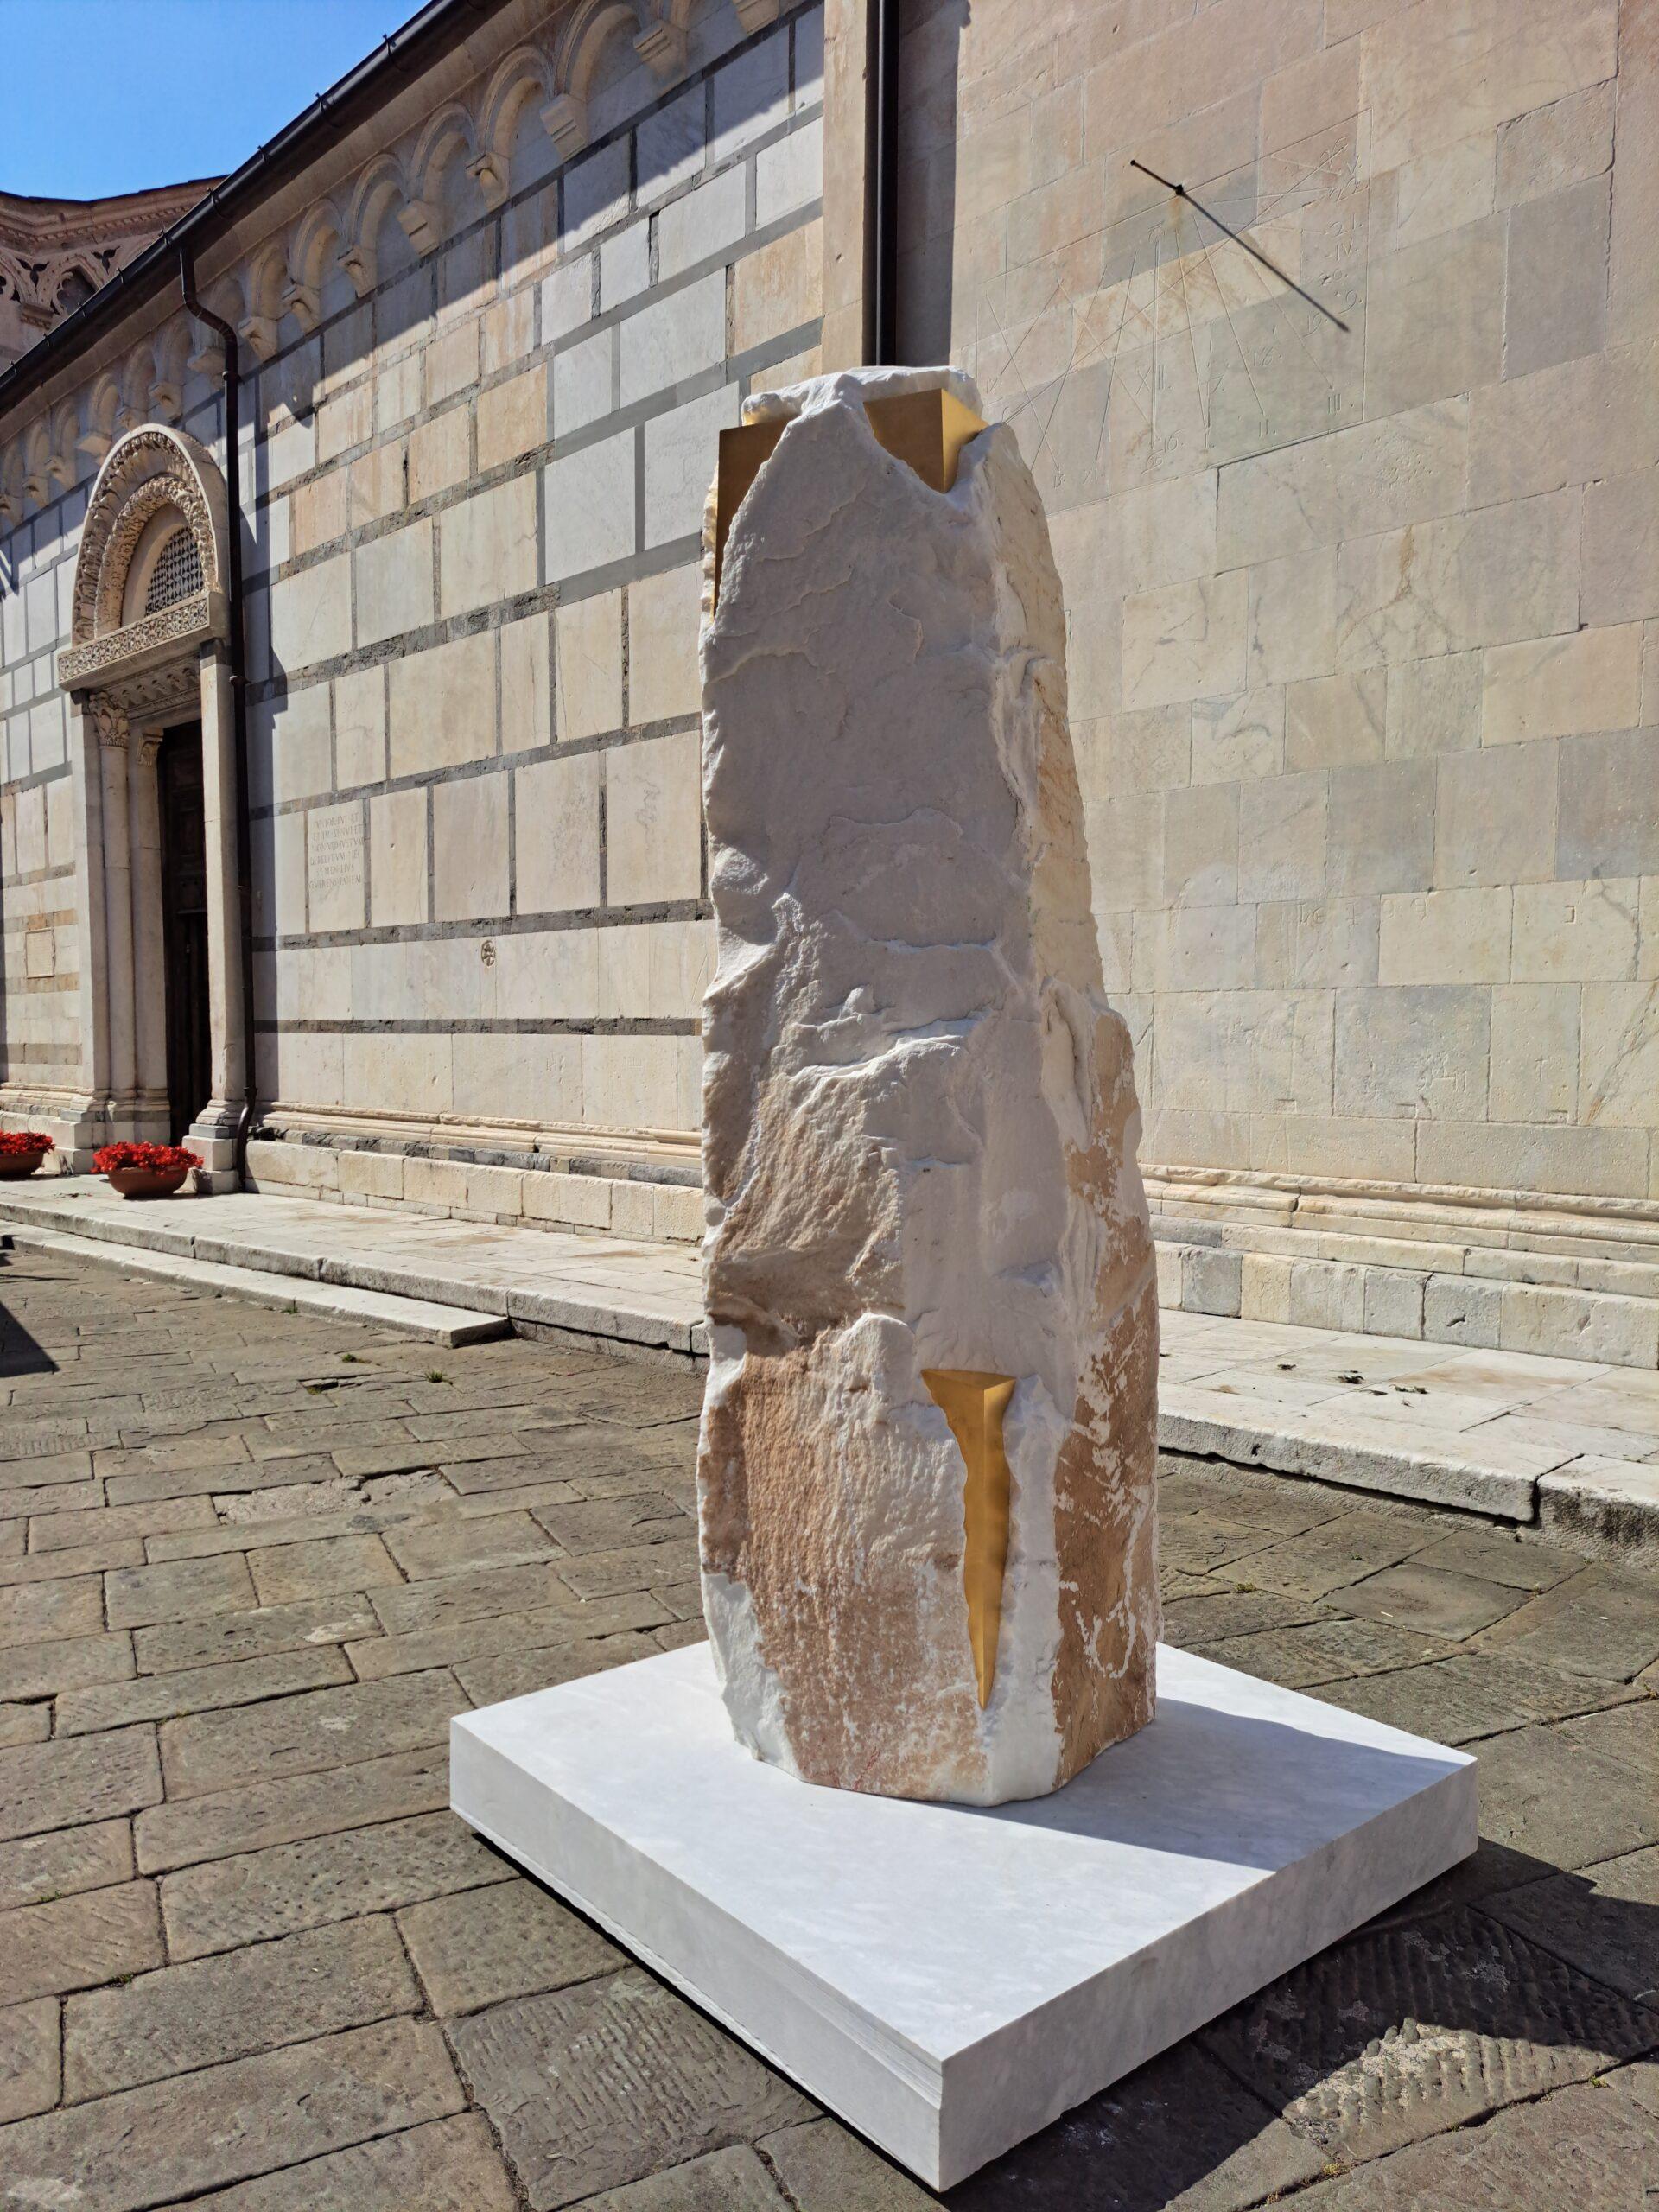 Sezione Aurea-C3 is a unique monumental sculpture by contemporary artist Mattia Bosco. This sculpture is made of Cave Michelangelo statuary marble and 23.8-carat gold leaf, dimensions are 223 × 82 × 60 cm (87.8 × 32.3 × 23.6 in). 
The sculpture